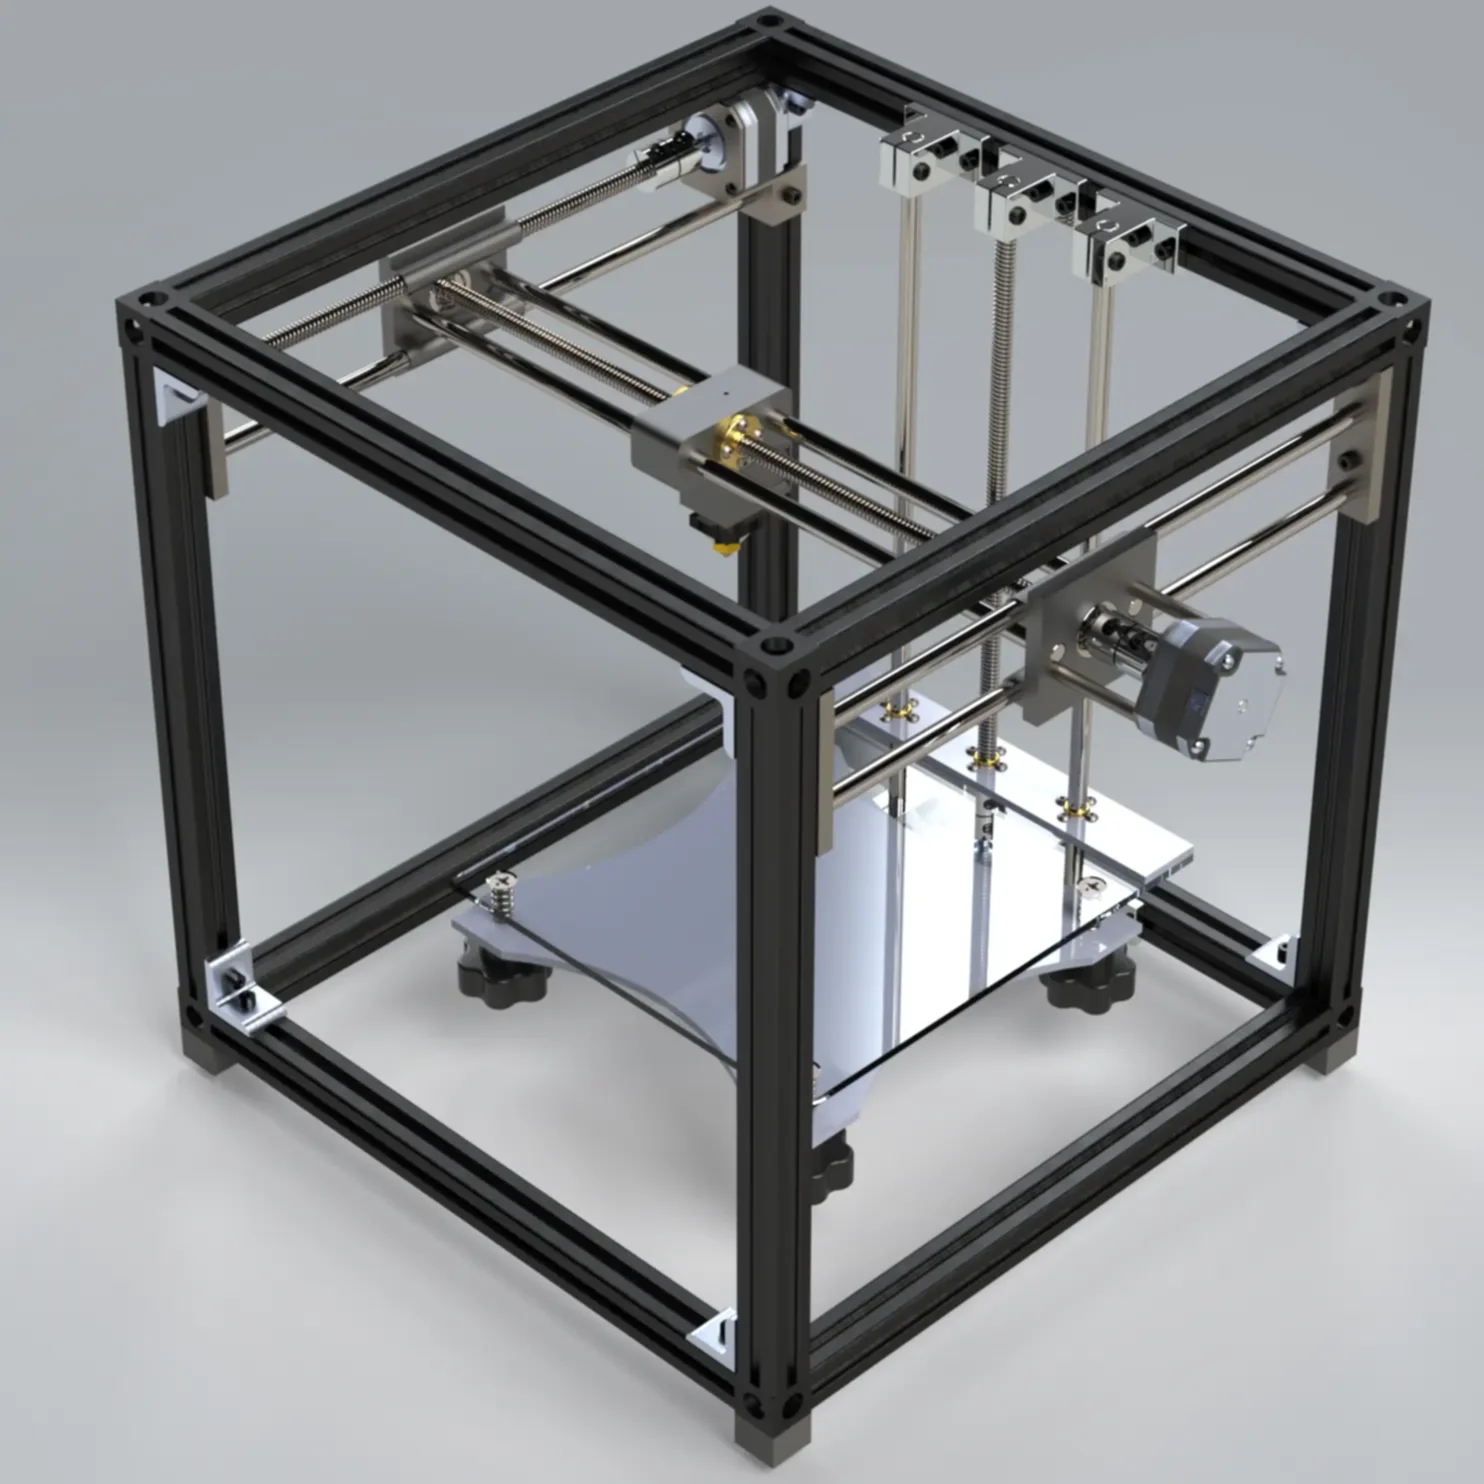 A photorealistic rendering of a core-xy based 3D printer, designed in SOLIDWORKS.